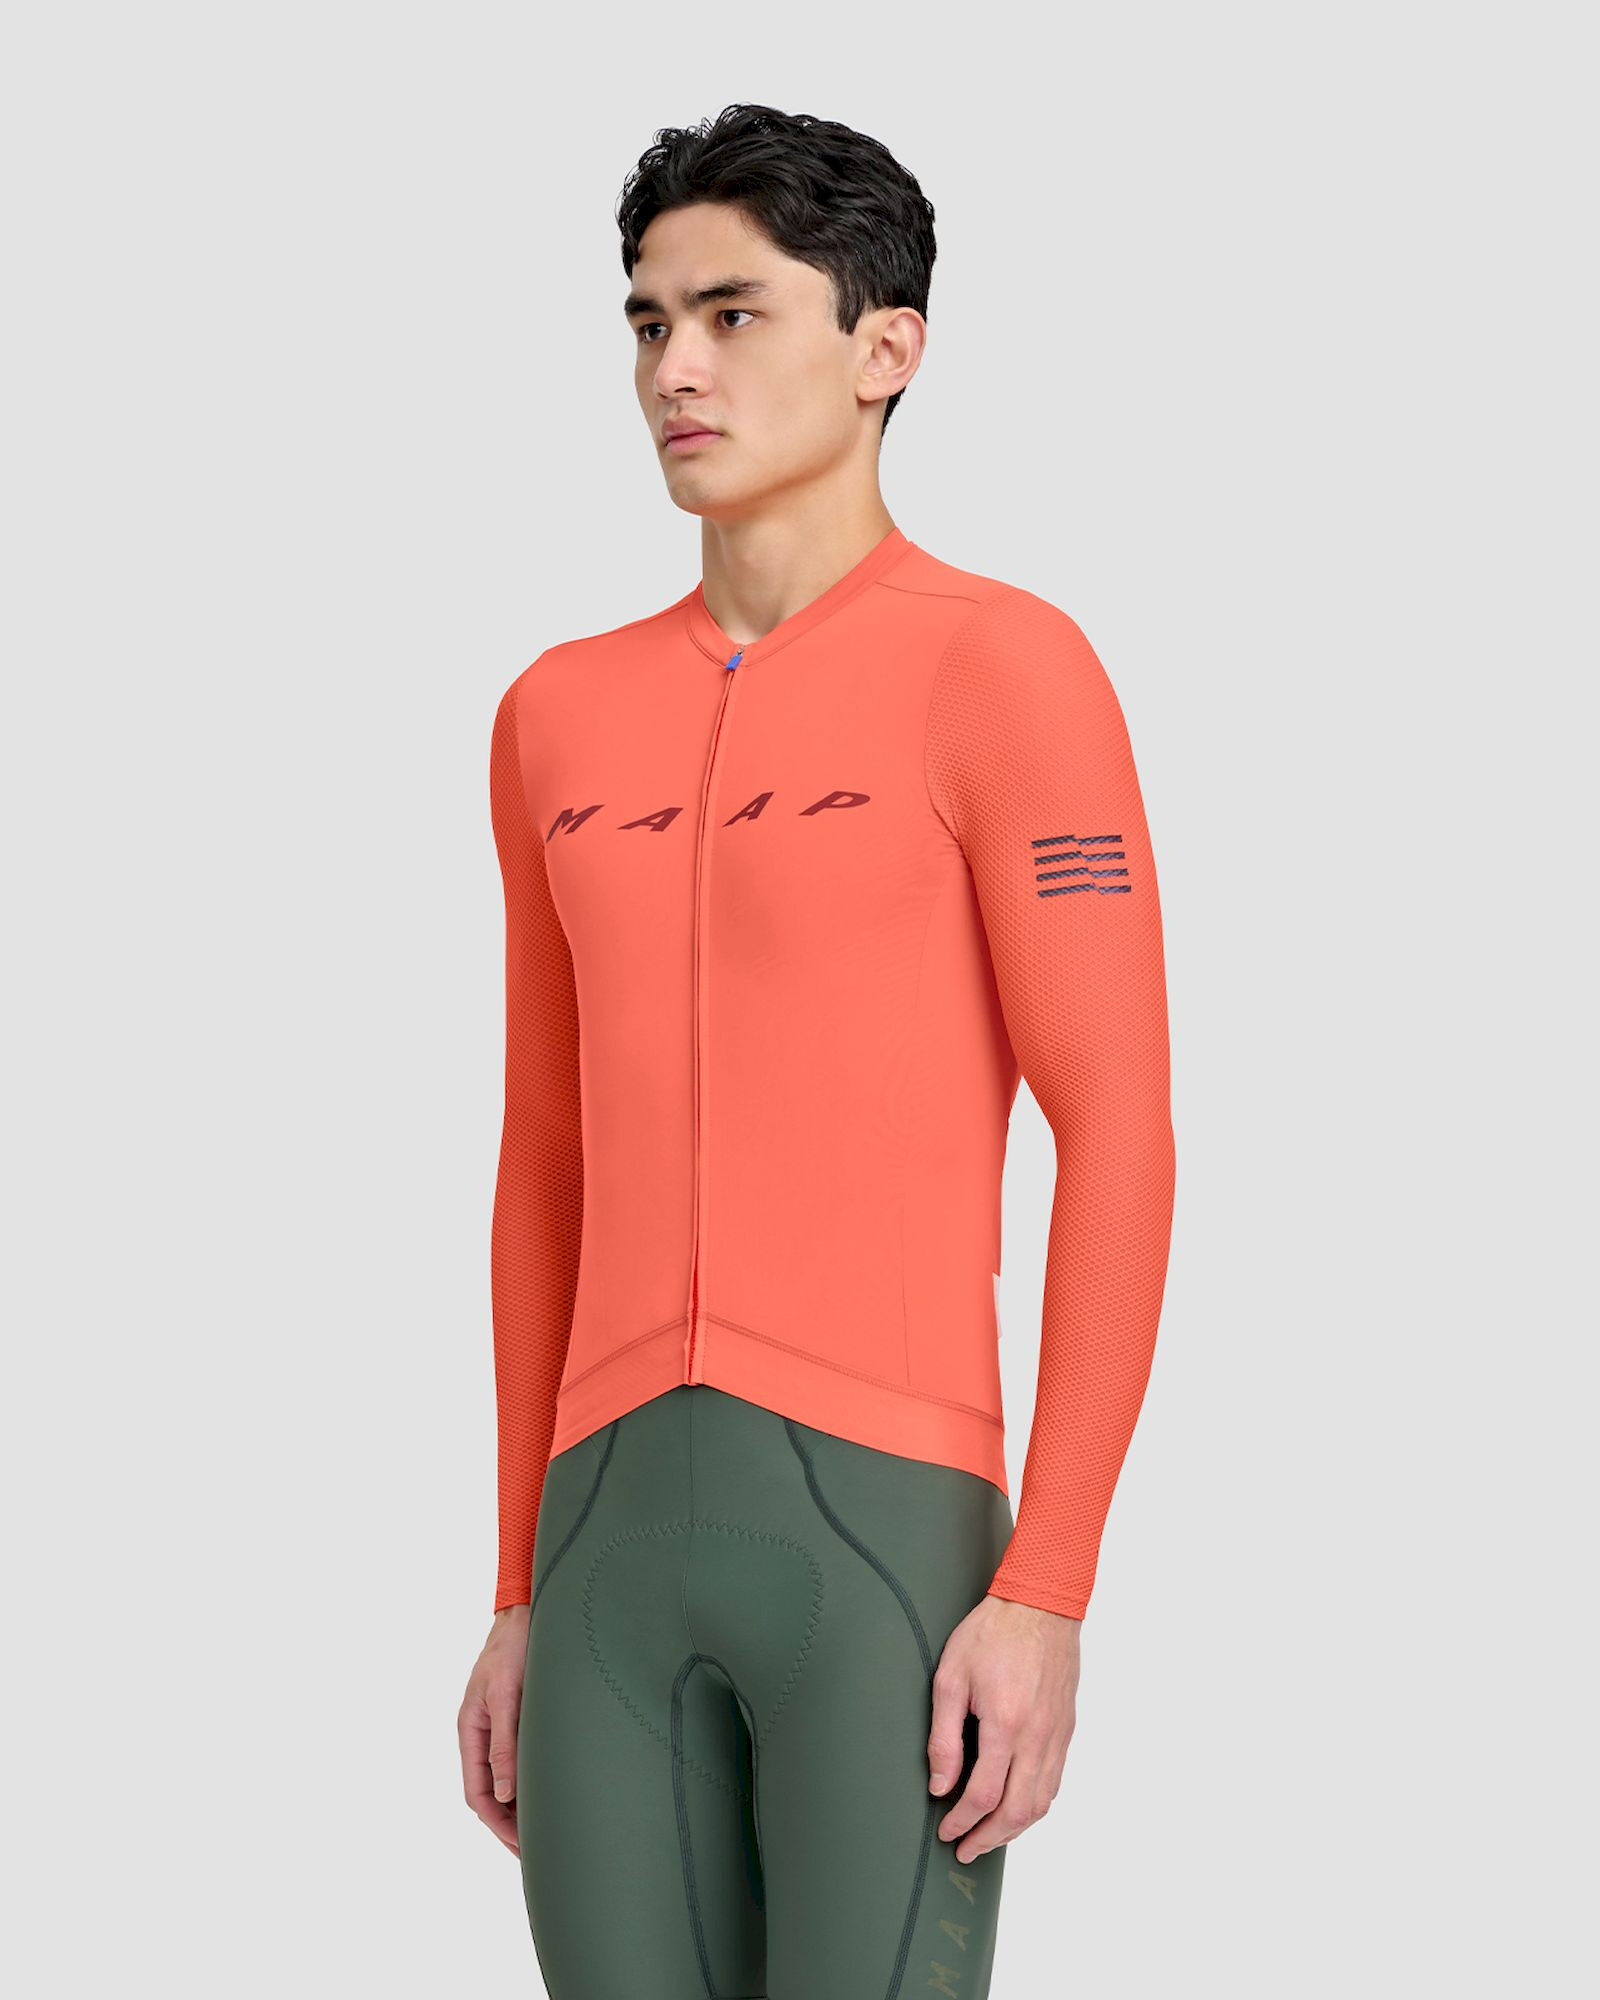 Maap Evade Pro Base LS Jersey - Maillot vélo homme | Hardloop